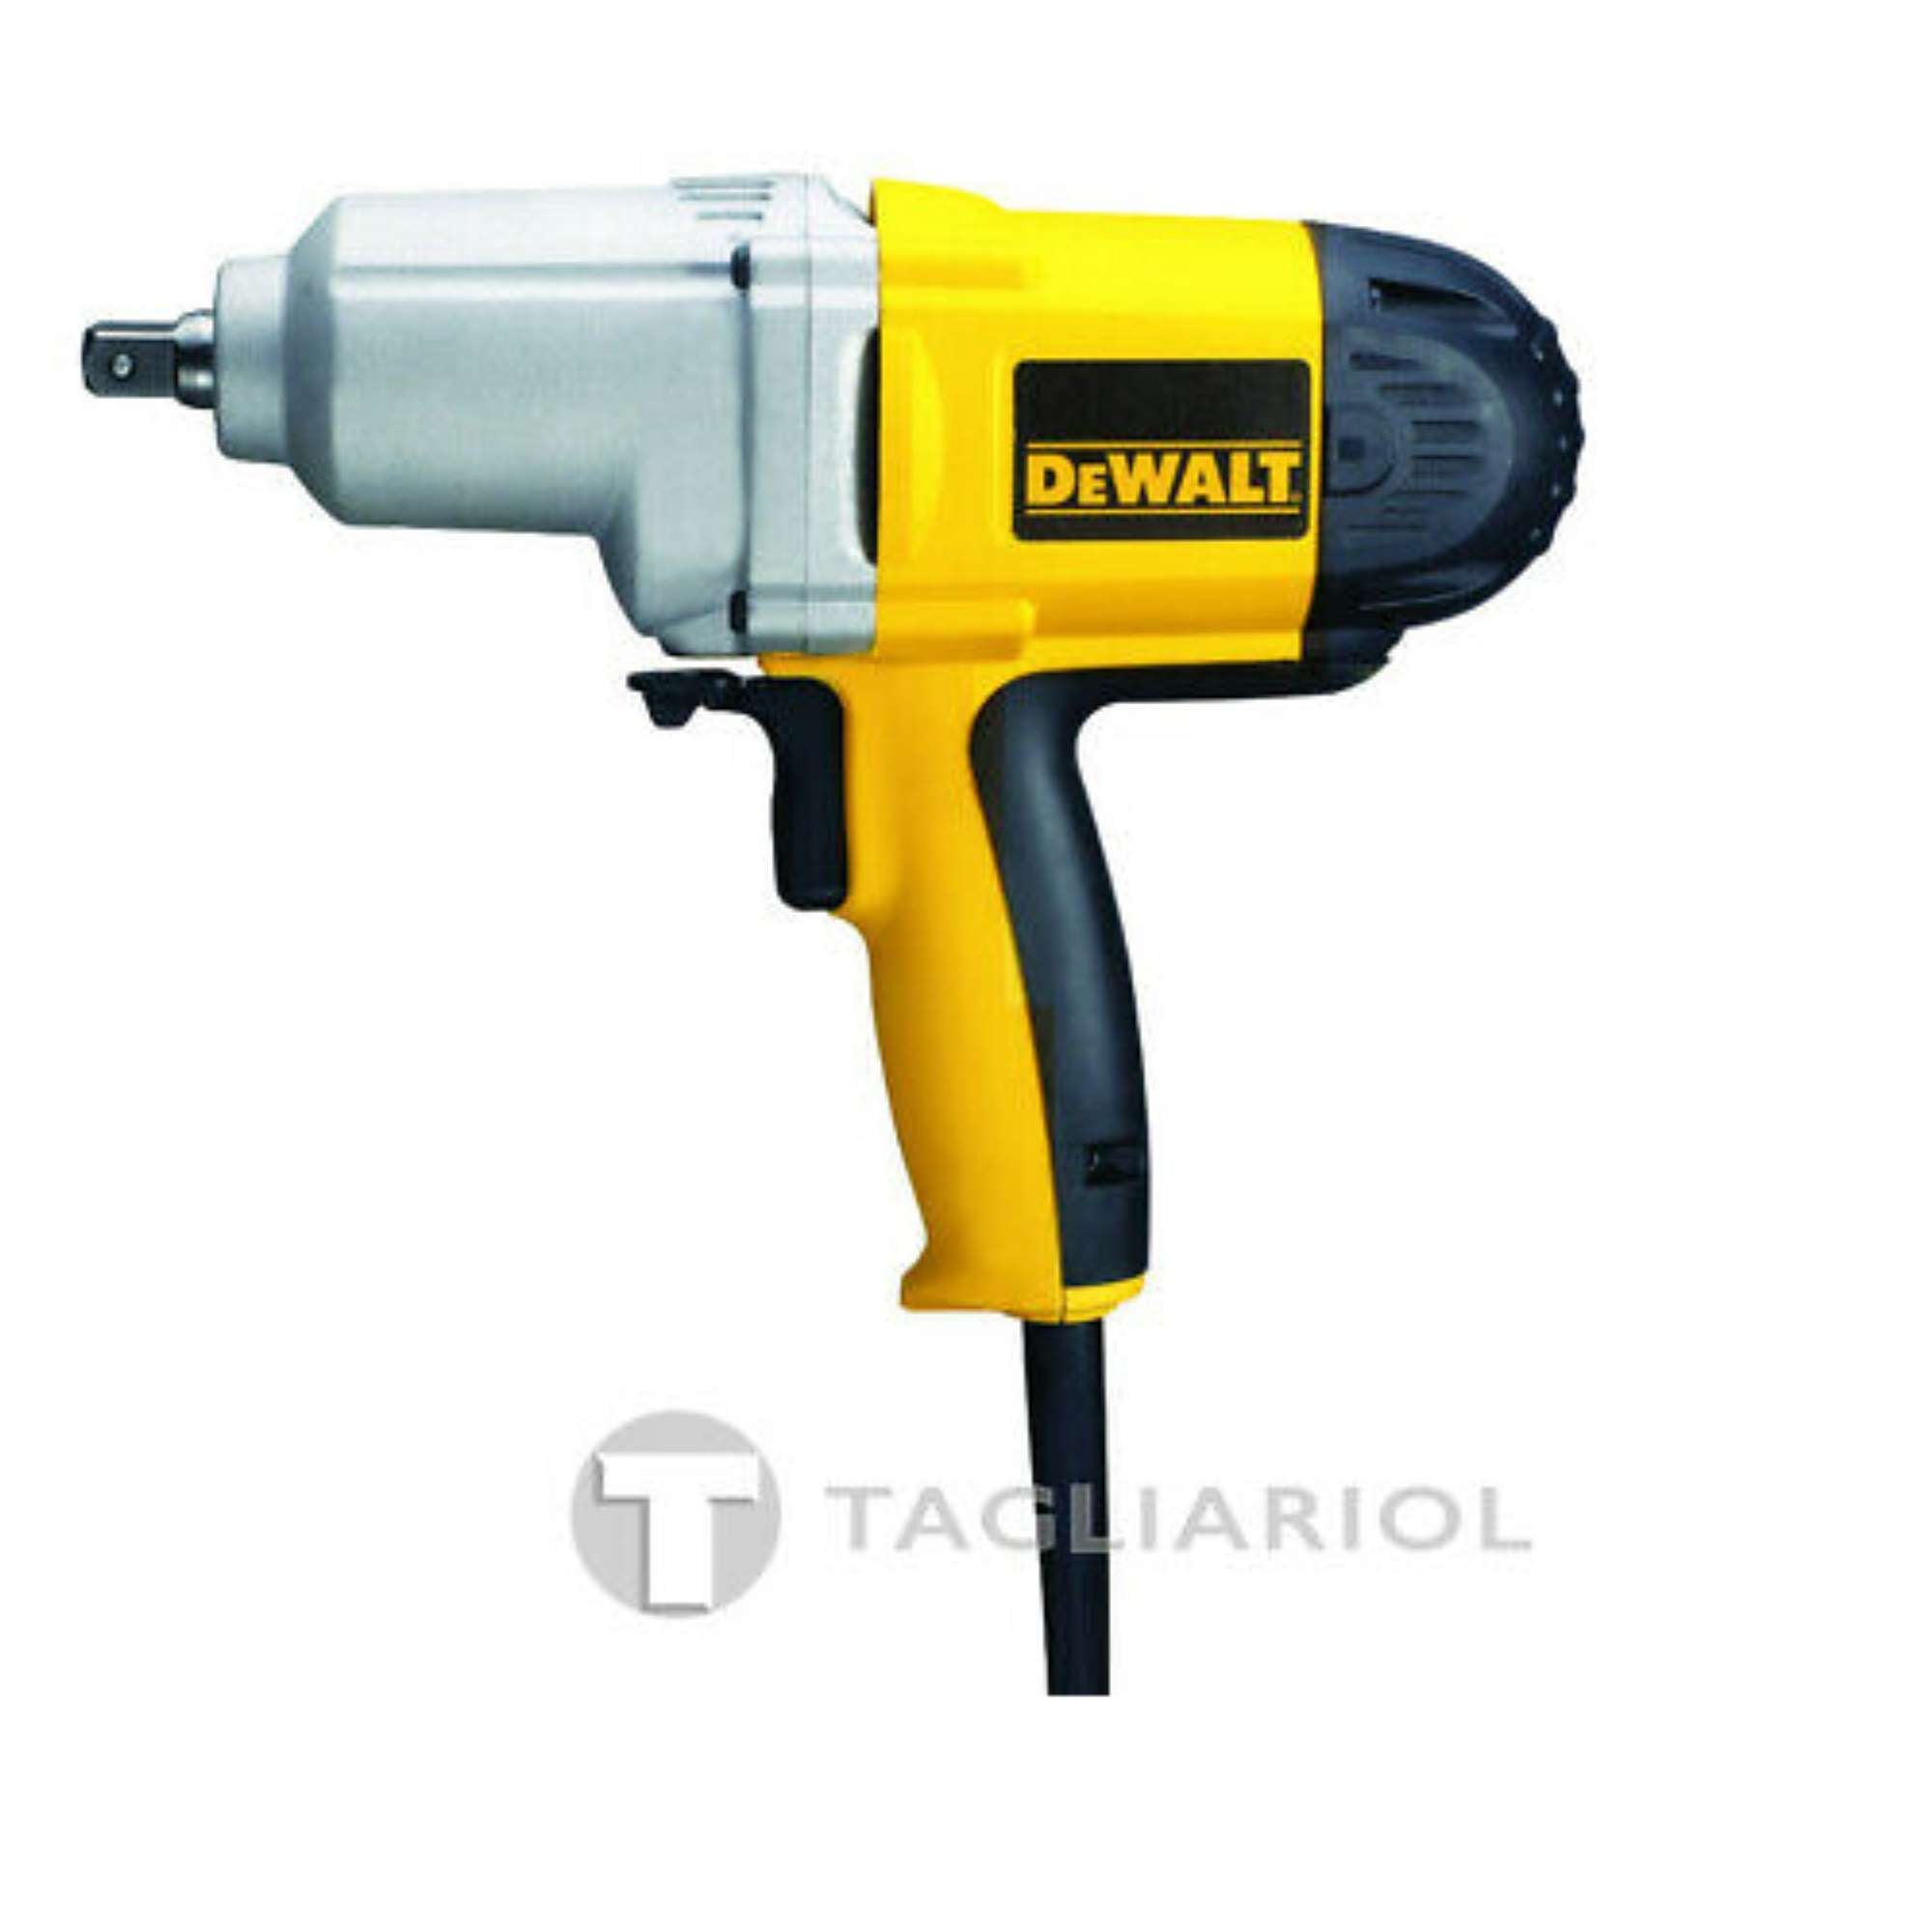 DeWalt DW292 impact wrench with 1/2" connection